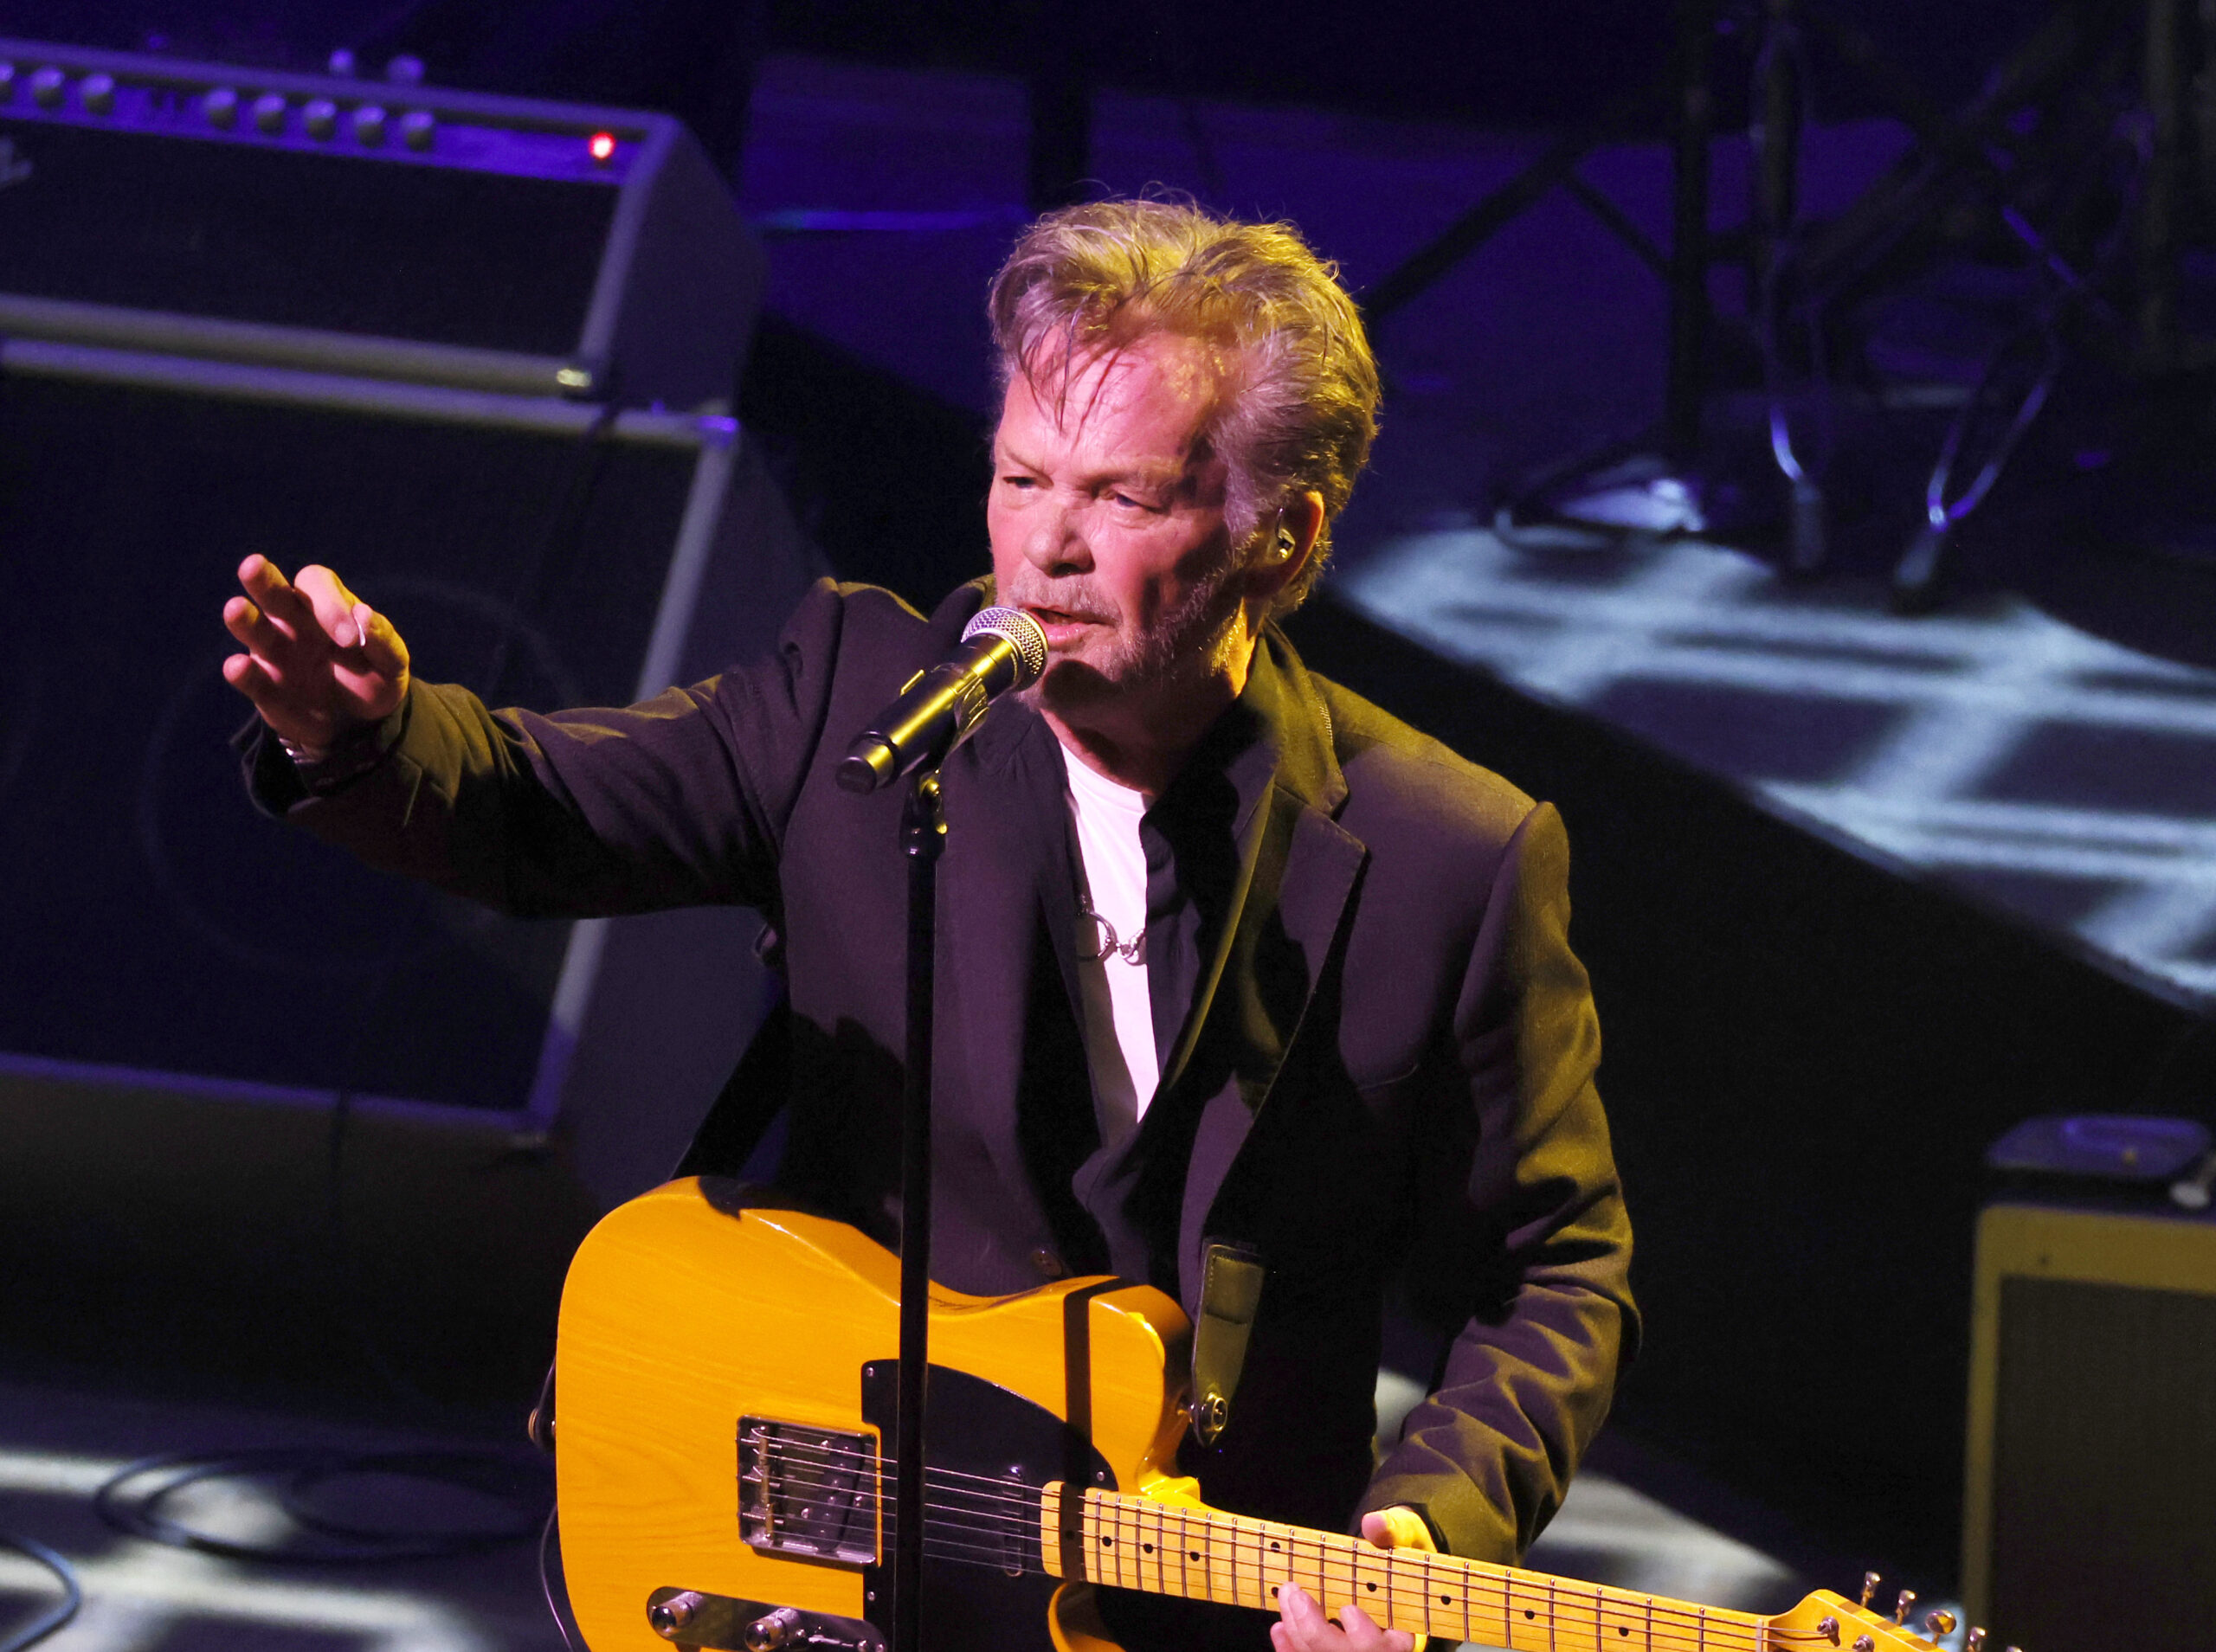 John Mellencamp responds to viral video showing him leaving stage abruptly